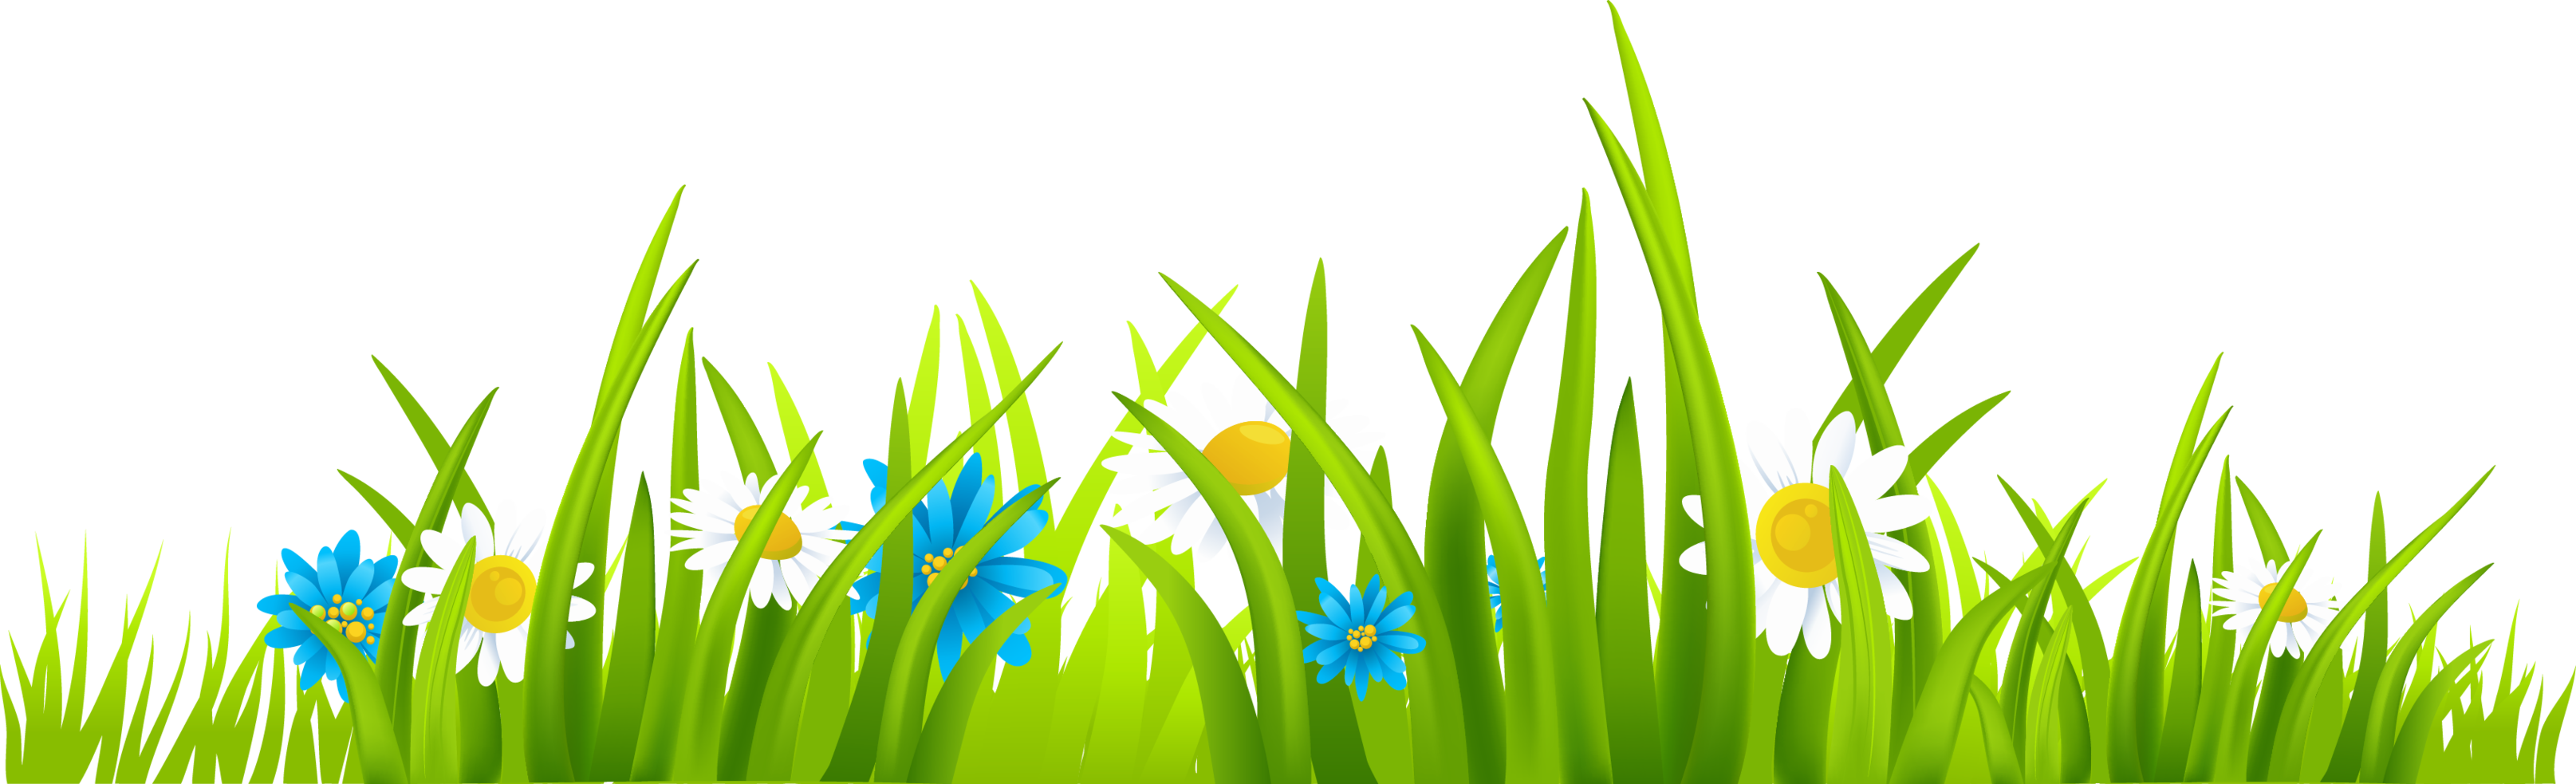 Grass Ground With Flowers PNG Clipart Picture Clipart